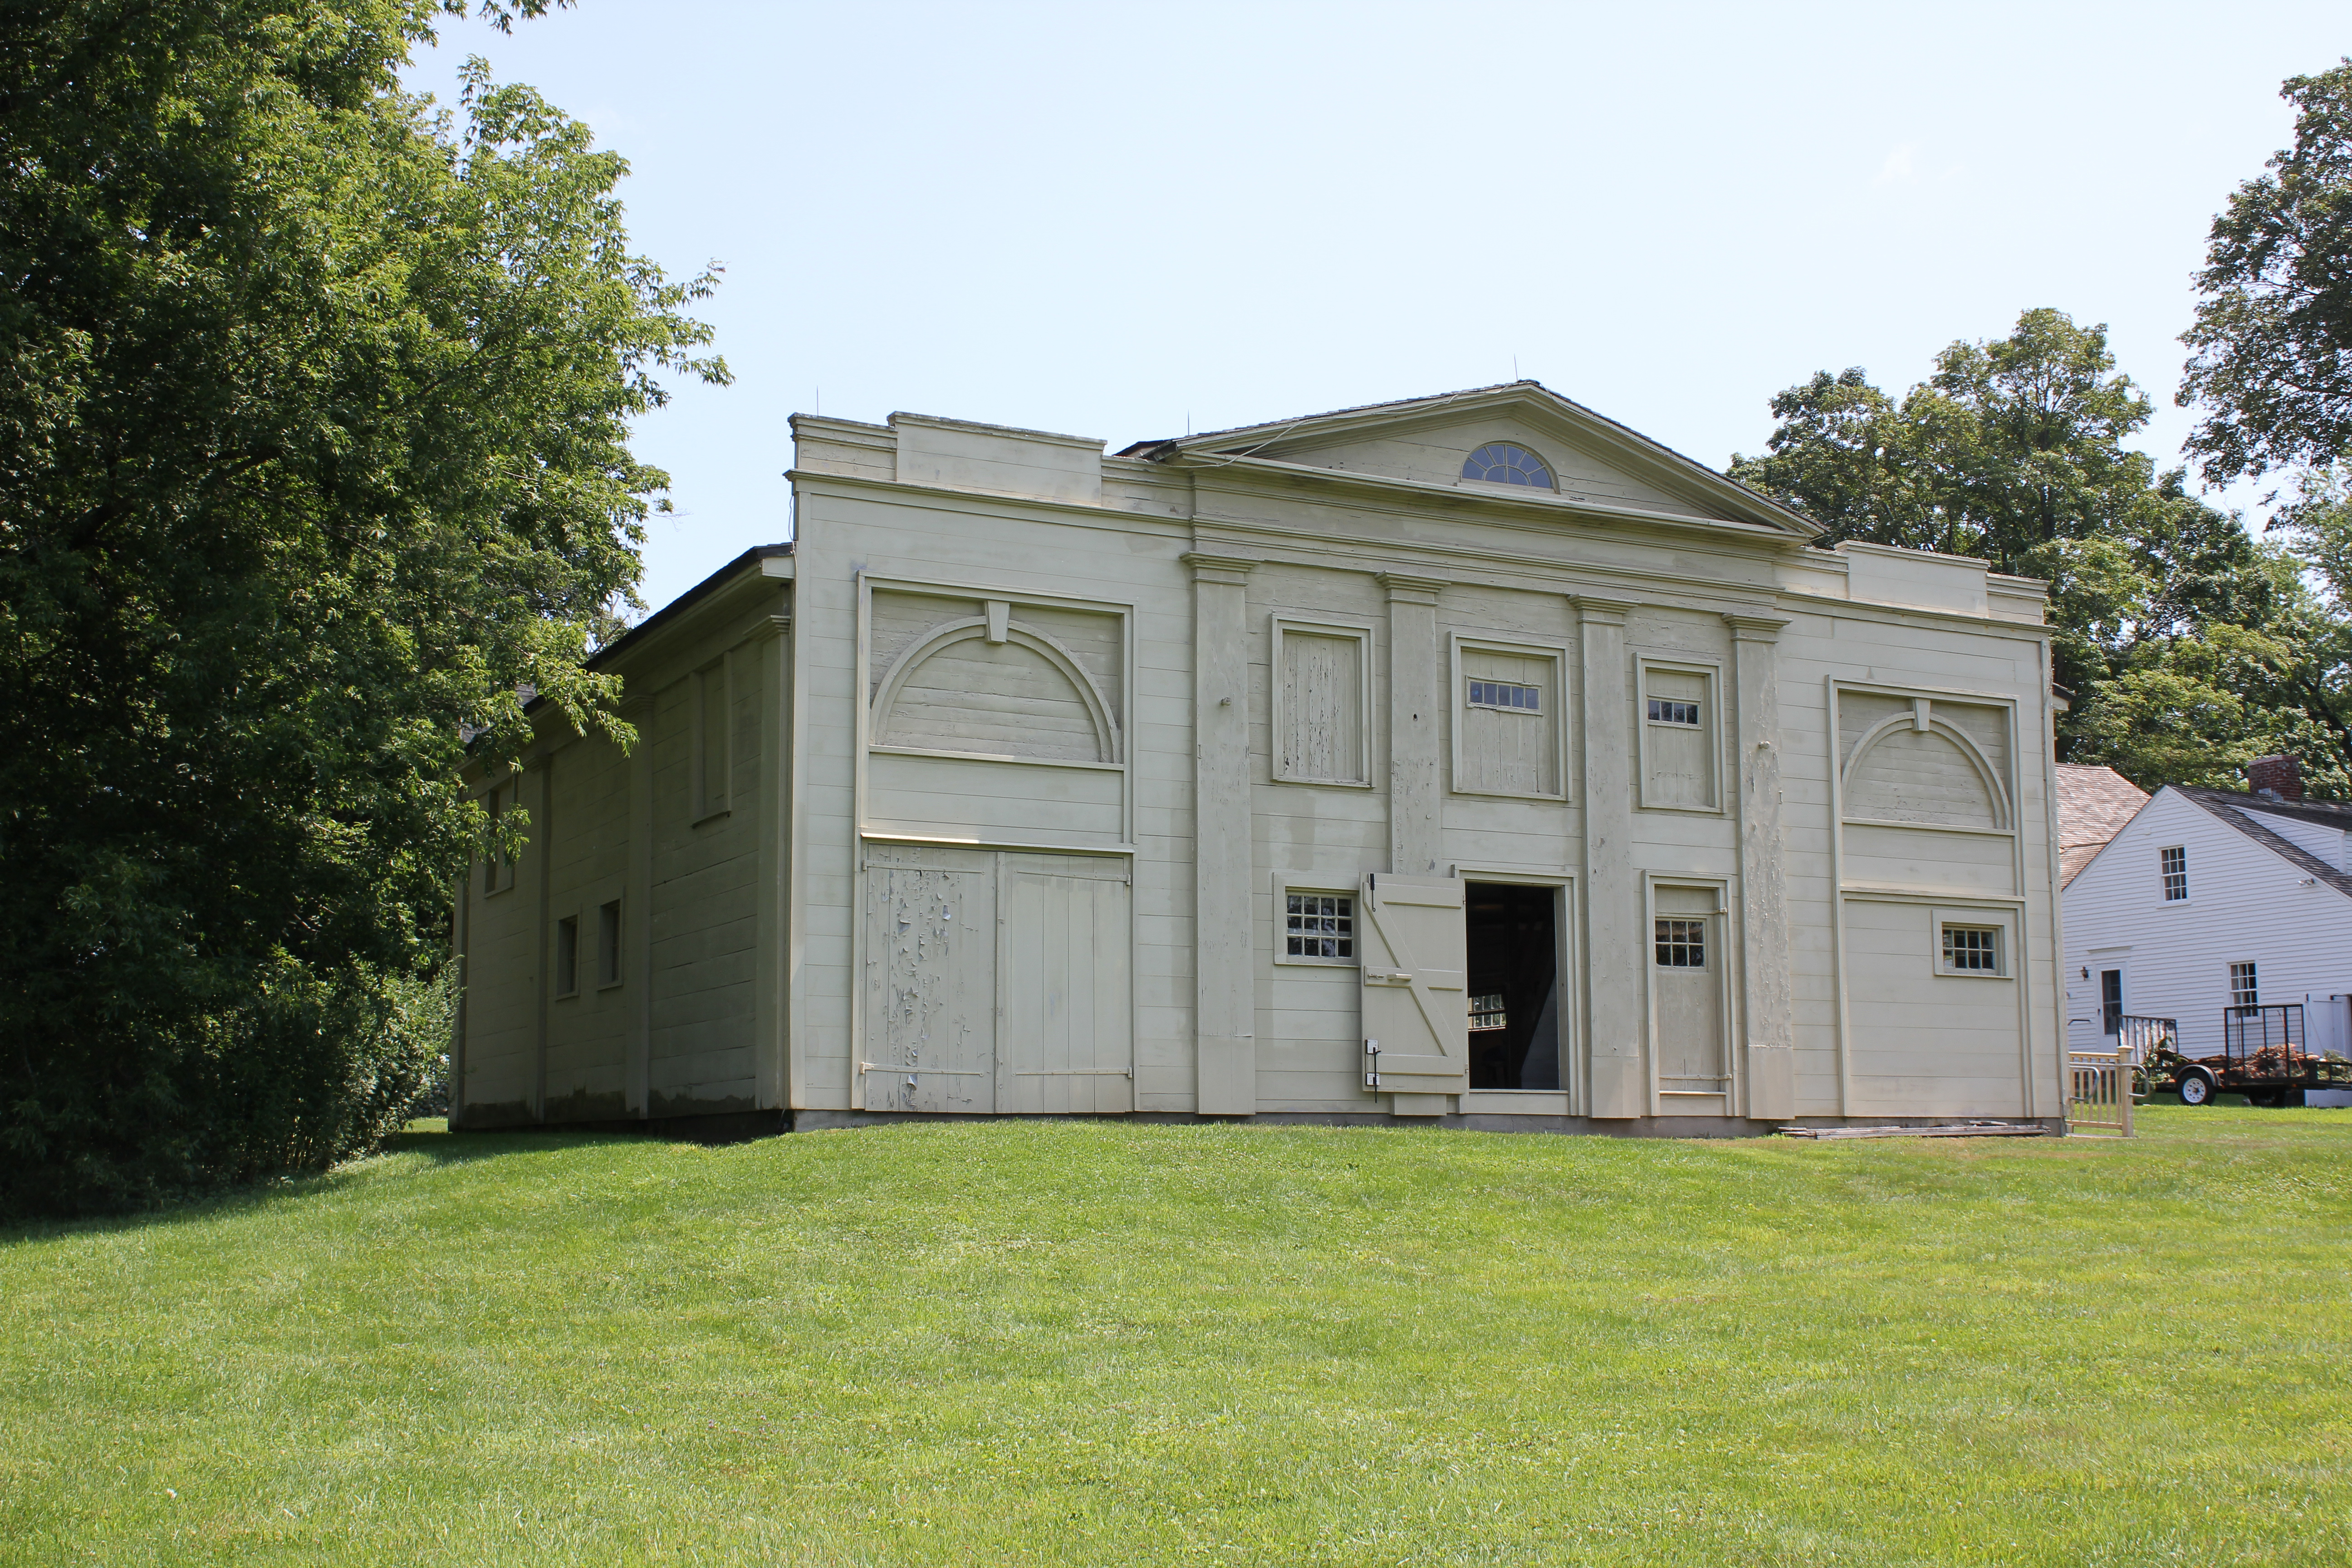 photo documentation of Wadsworth Stable, built 1730, in Connecticut, USA